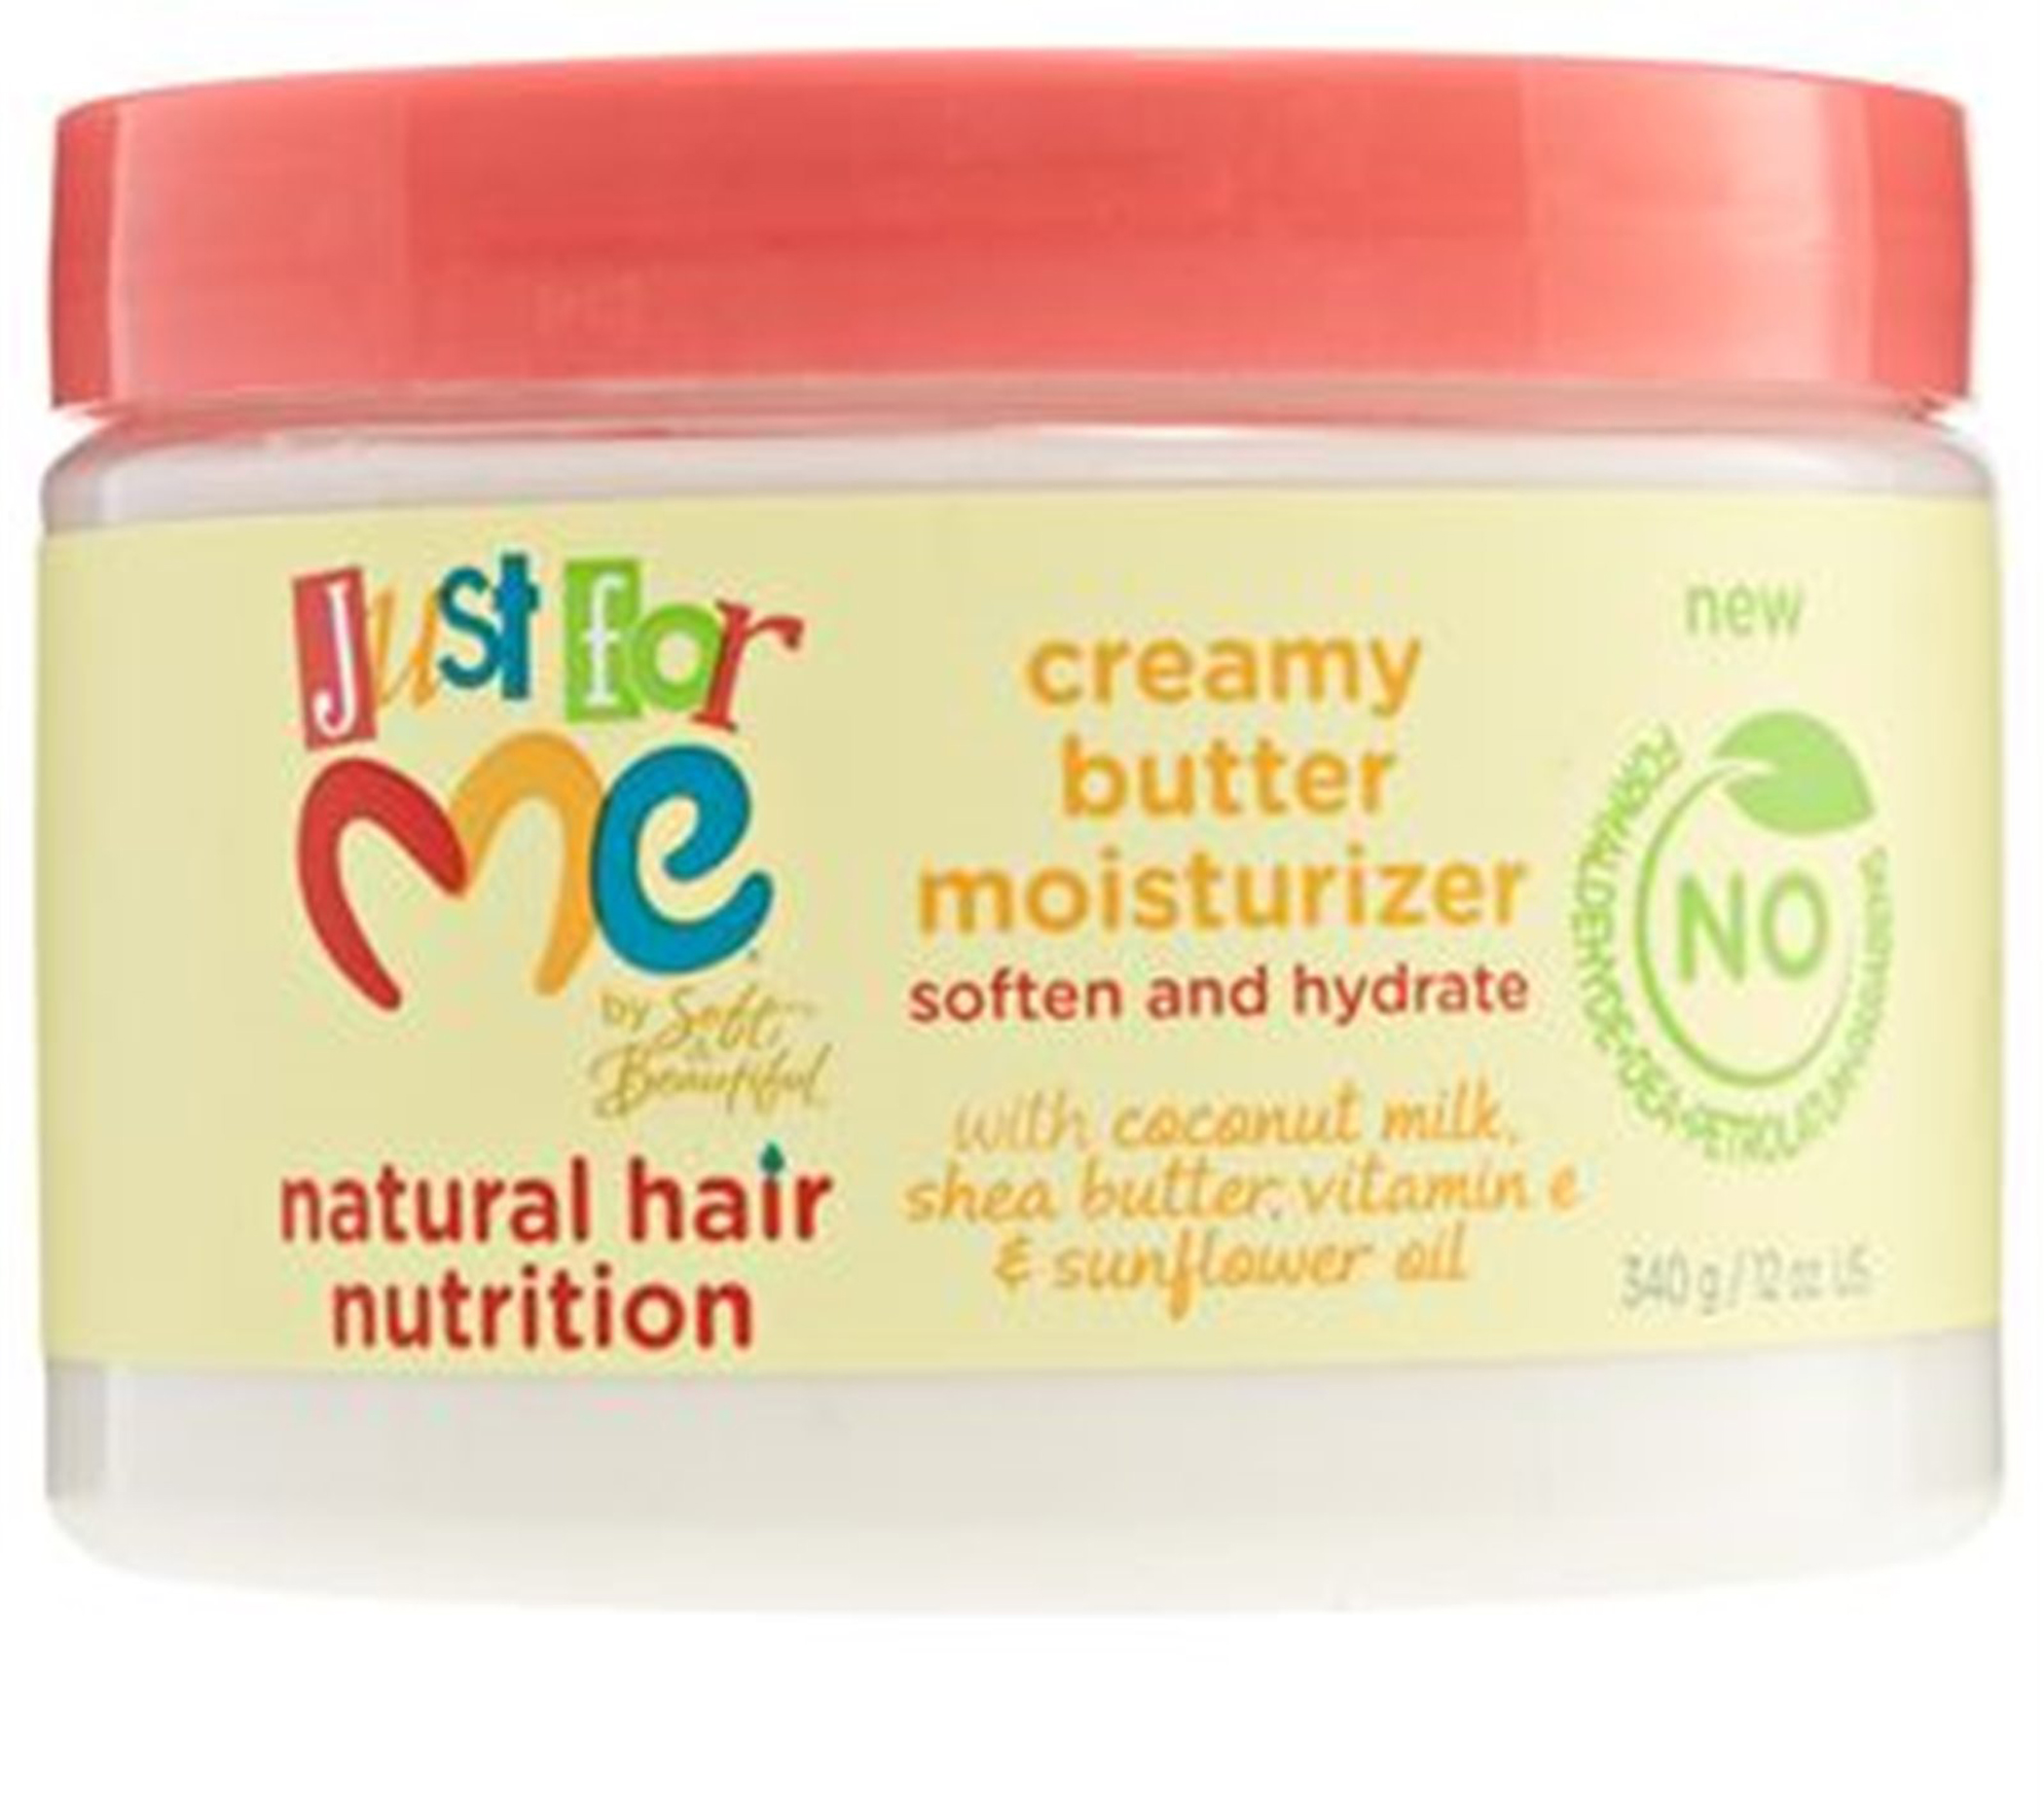 Just For Me Natural Hair Nutrition Creamy Butter Moisturizer 340gm